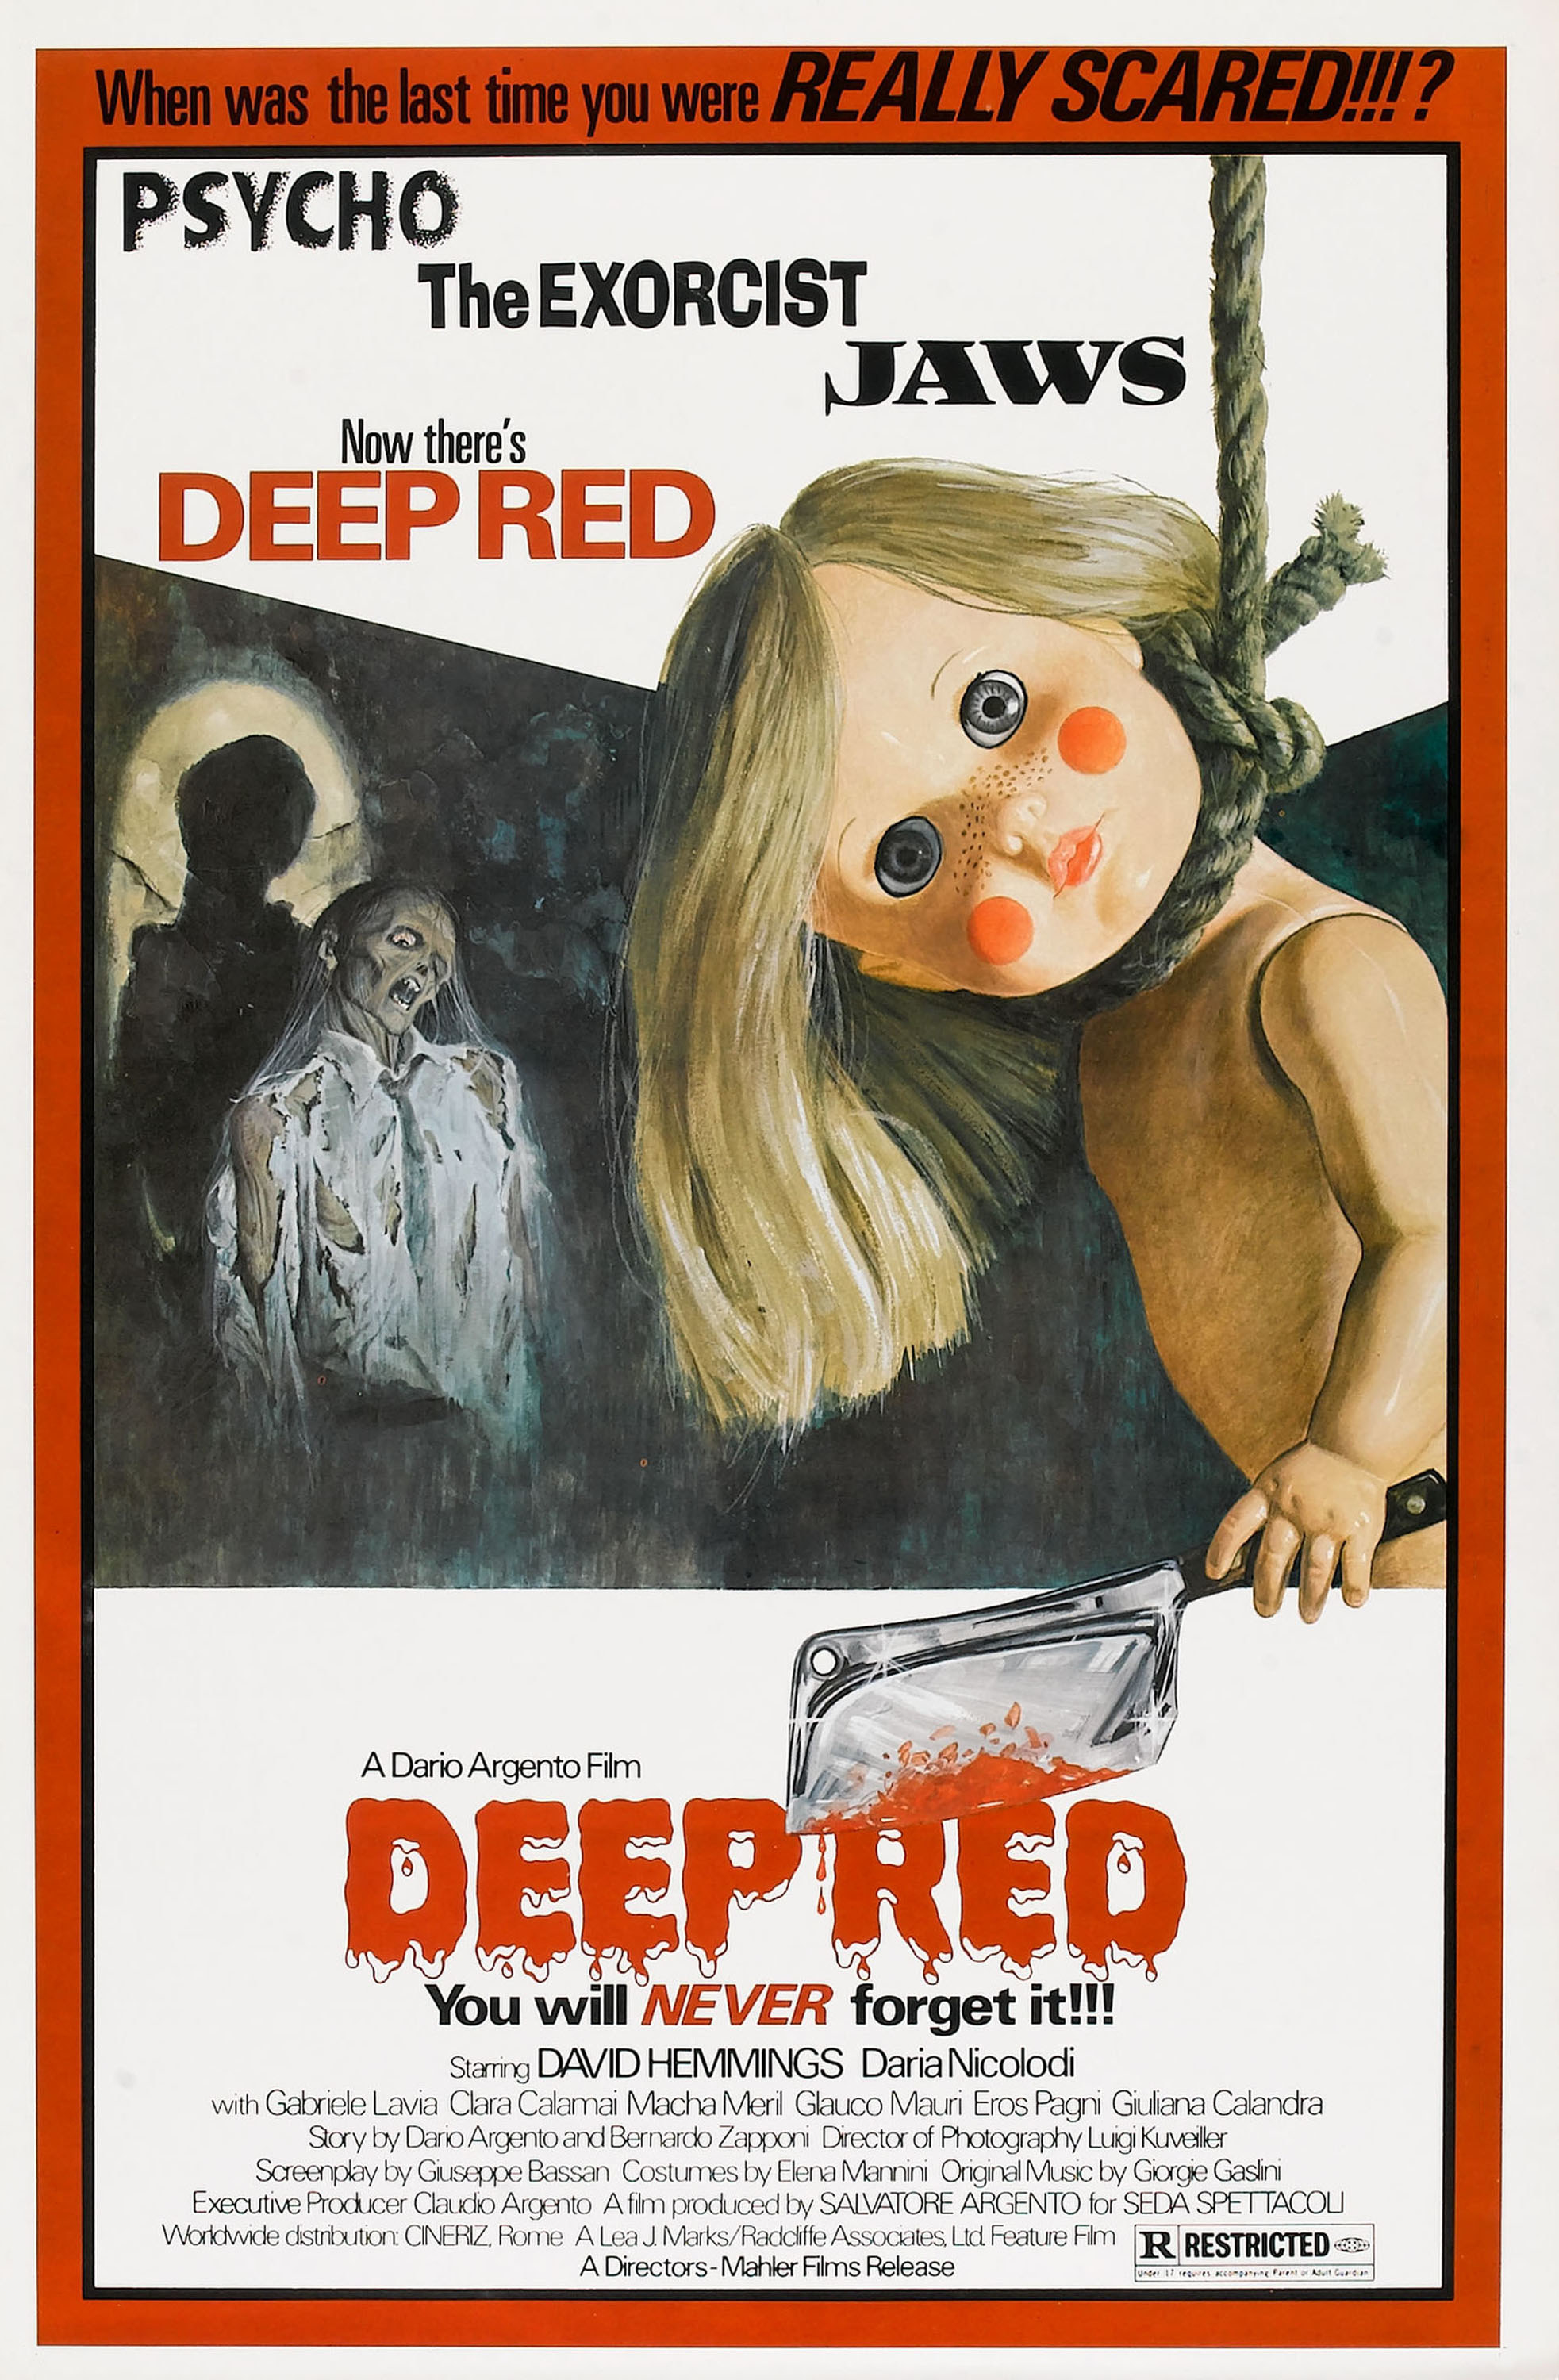 movie poster for Deep Red with a hanging doll holding a huge knife